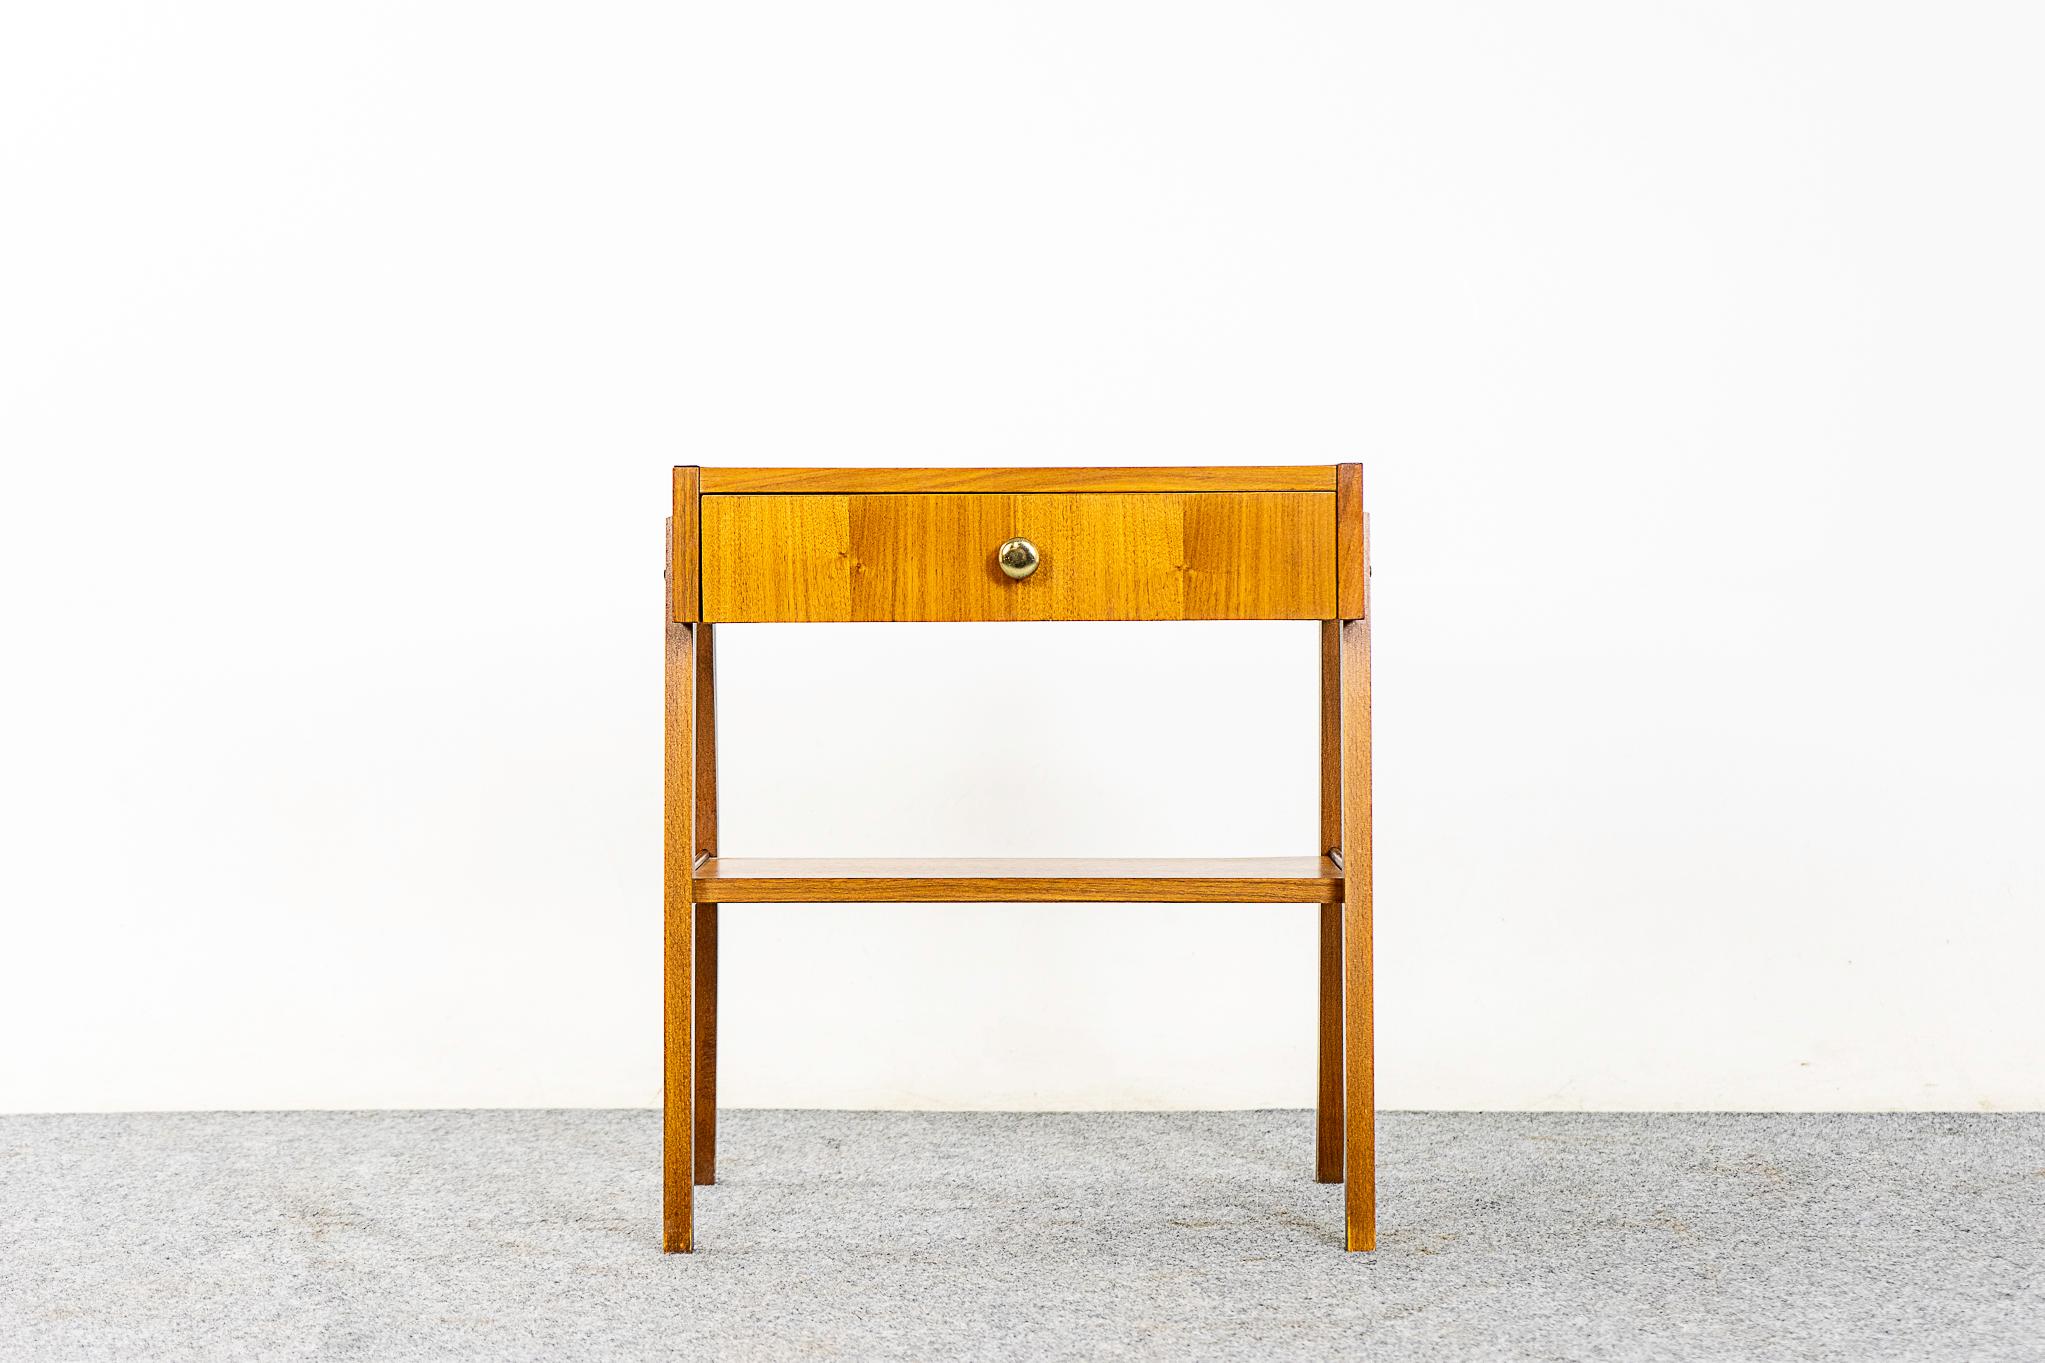 Teak midcentury bedside table, circa 1960s. Beautifully veneered case rests on slender, tapered legs. Single dovetailed drawer offer storage for small items while lower shelf is perfect for your favorite book.

Unrestored item, some very minor marks